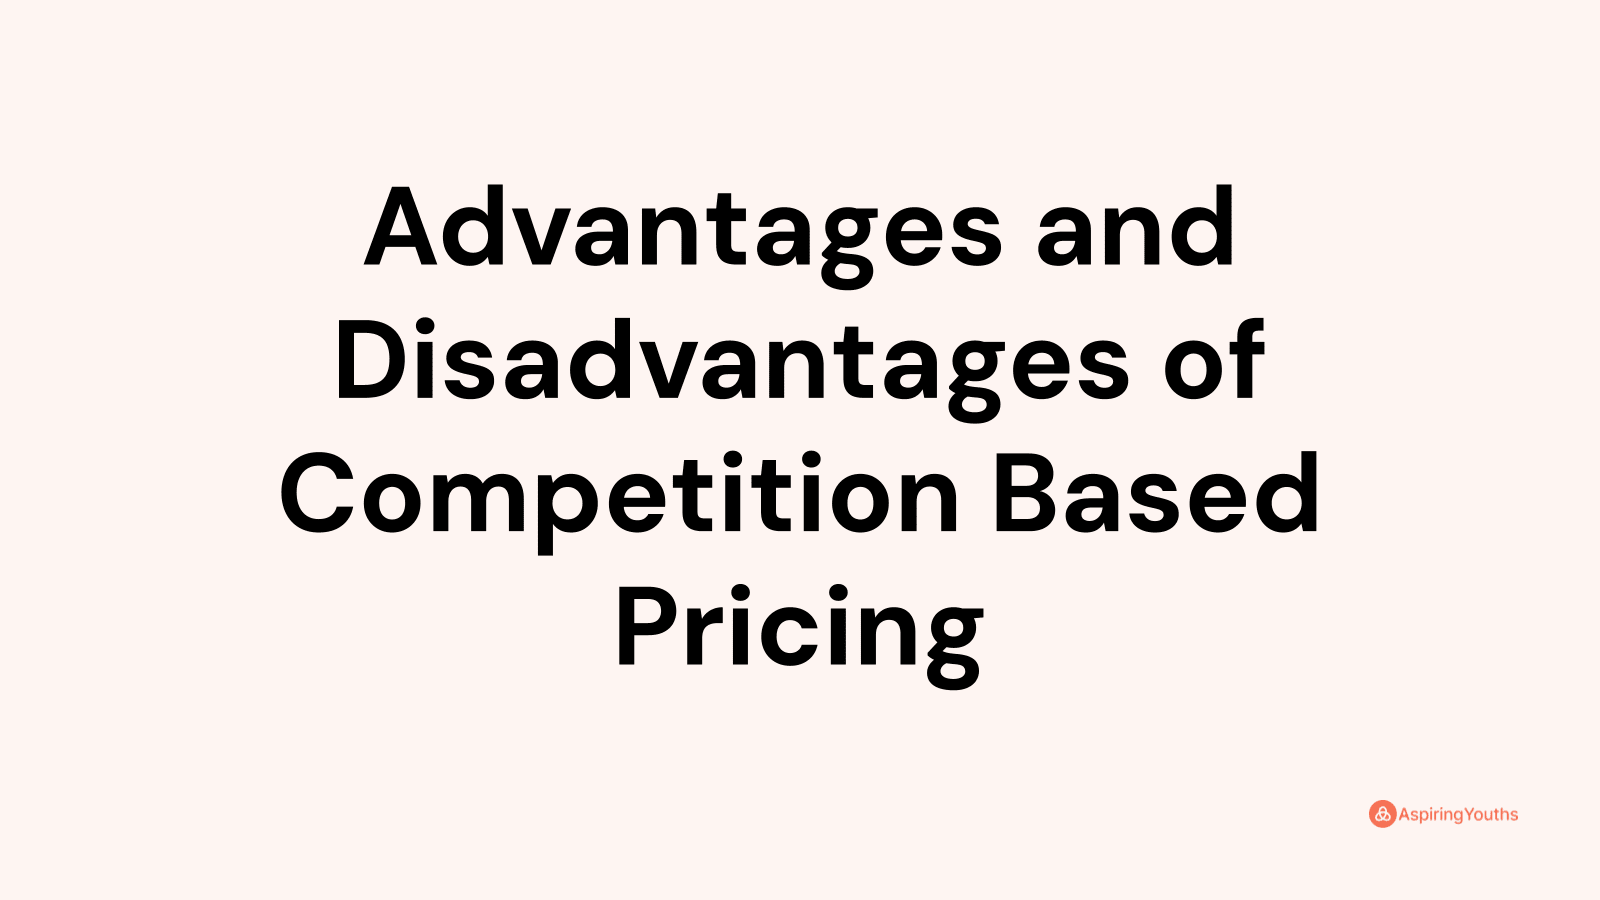 Advantages and disadvantages of Competition Based Pricing